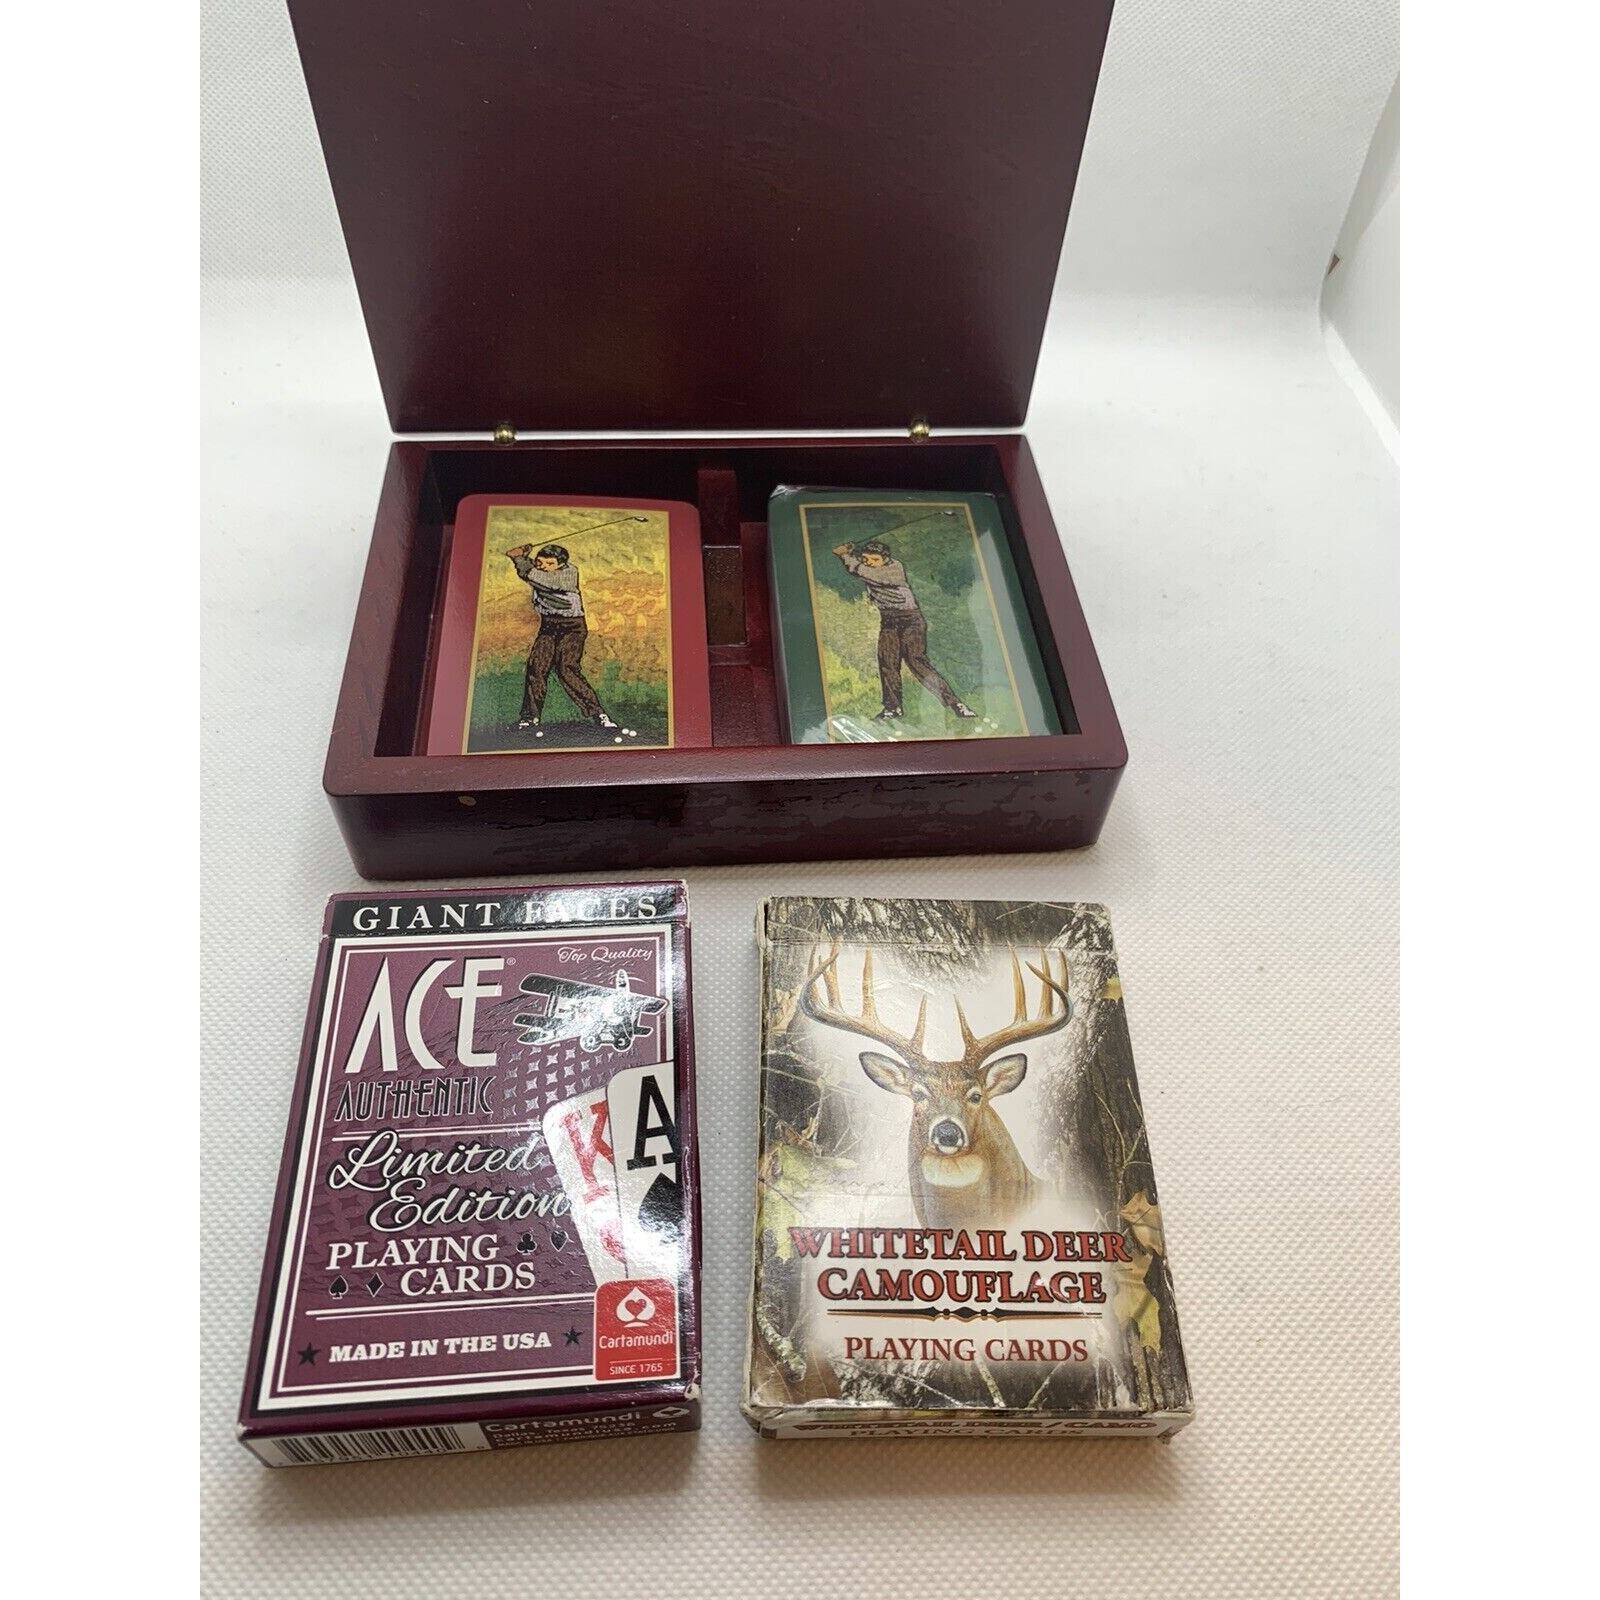 Poker Bridge Playing Cards Golf themed Cherry Box Whitetail Giant Faces